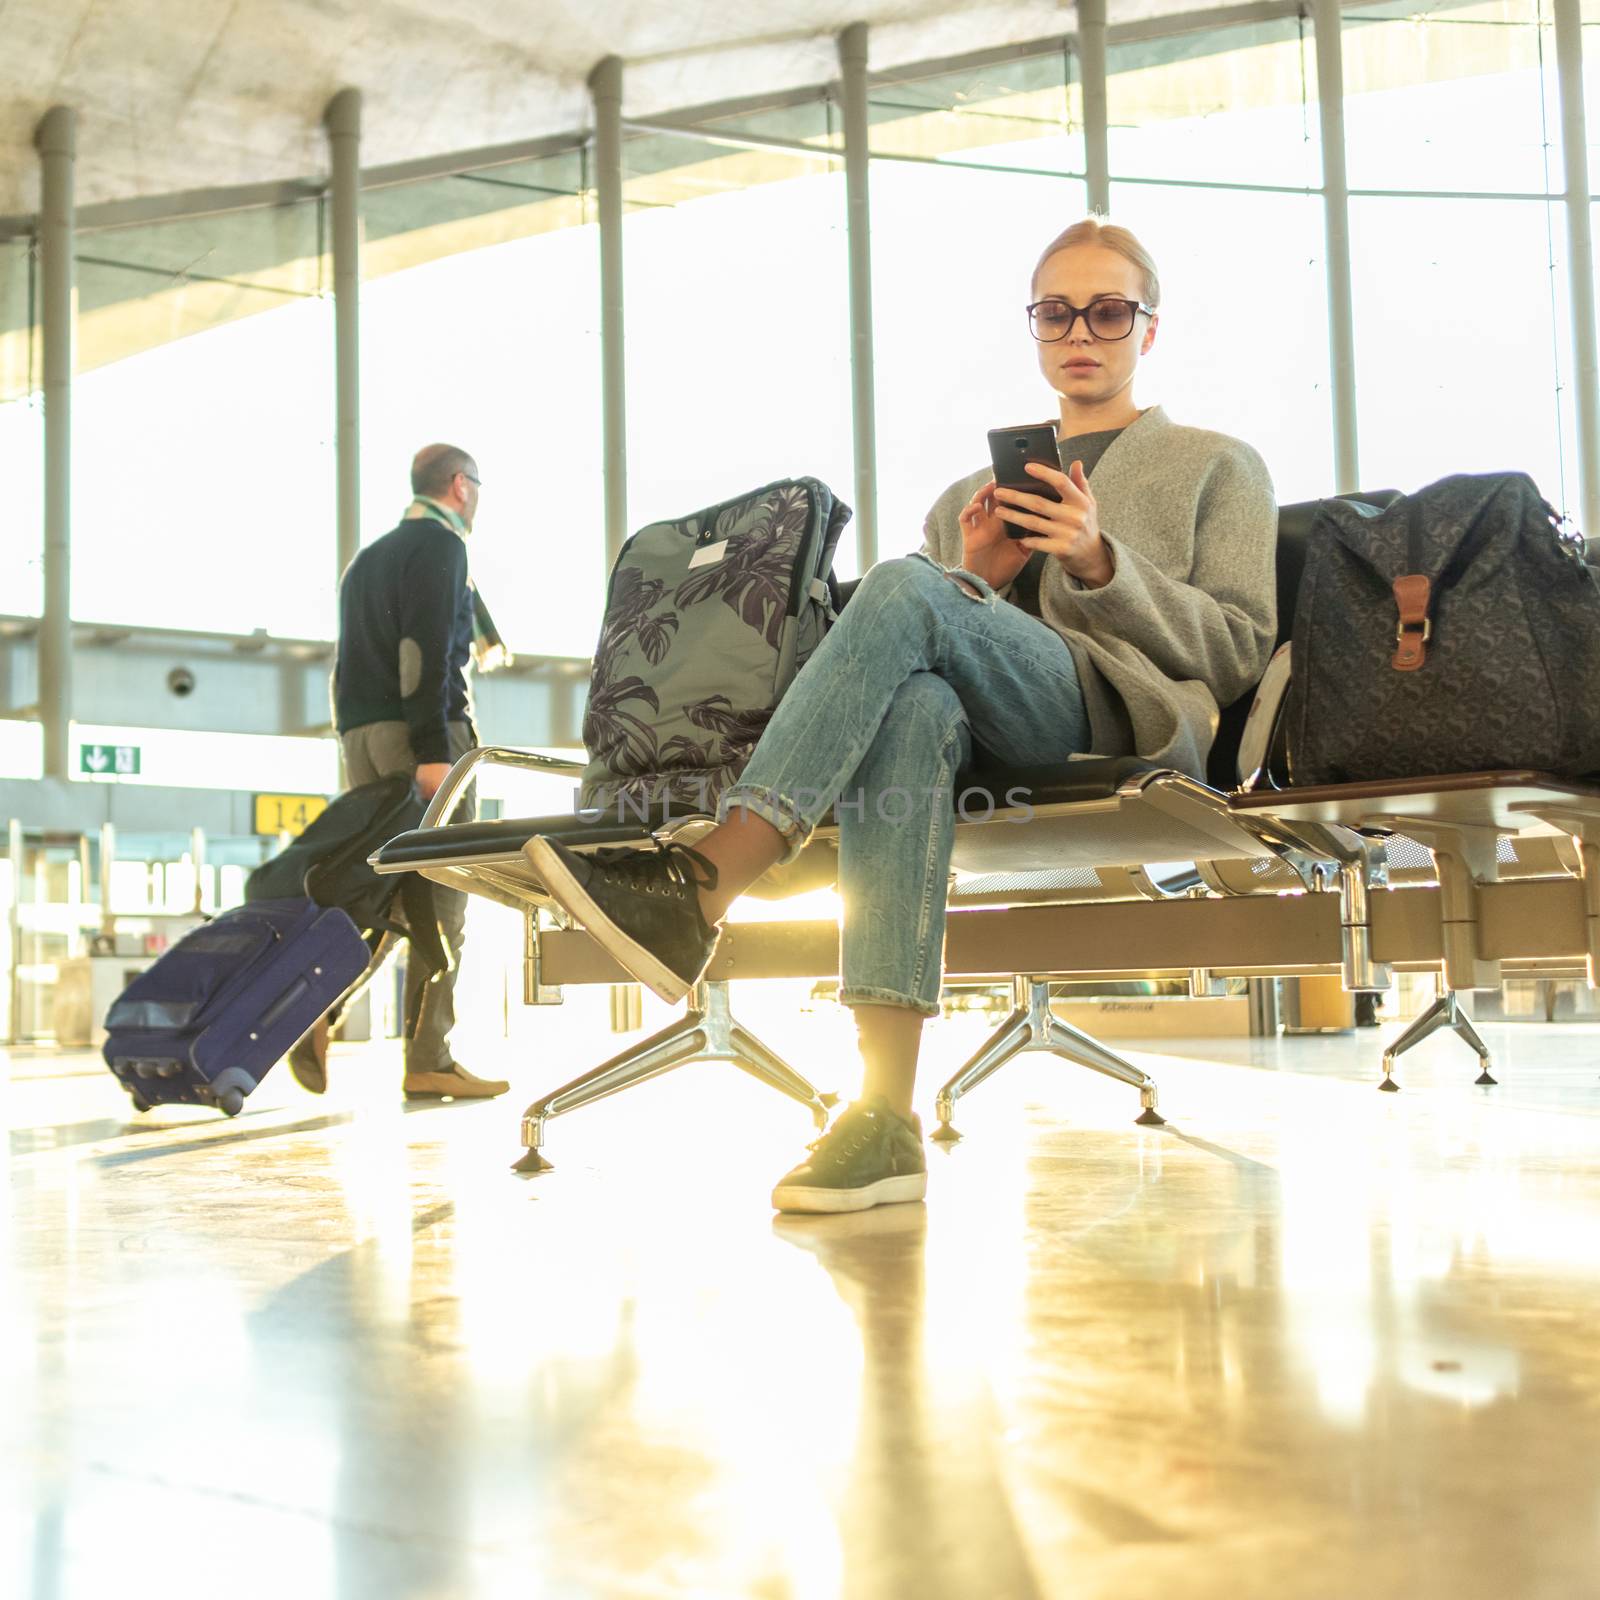 Female traveler using her cell phone while waiting to board a plane at departure gates at airport terminal. by kasto